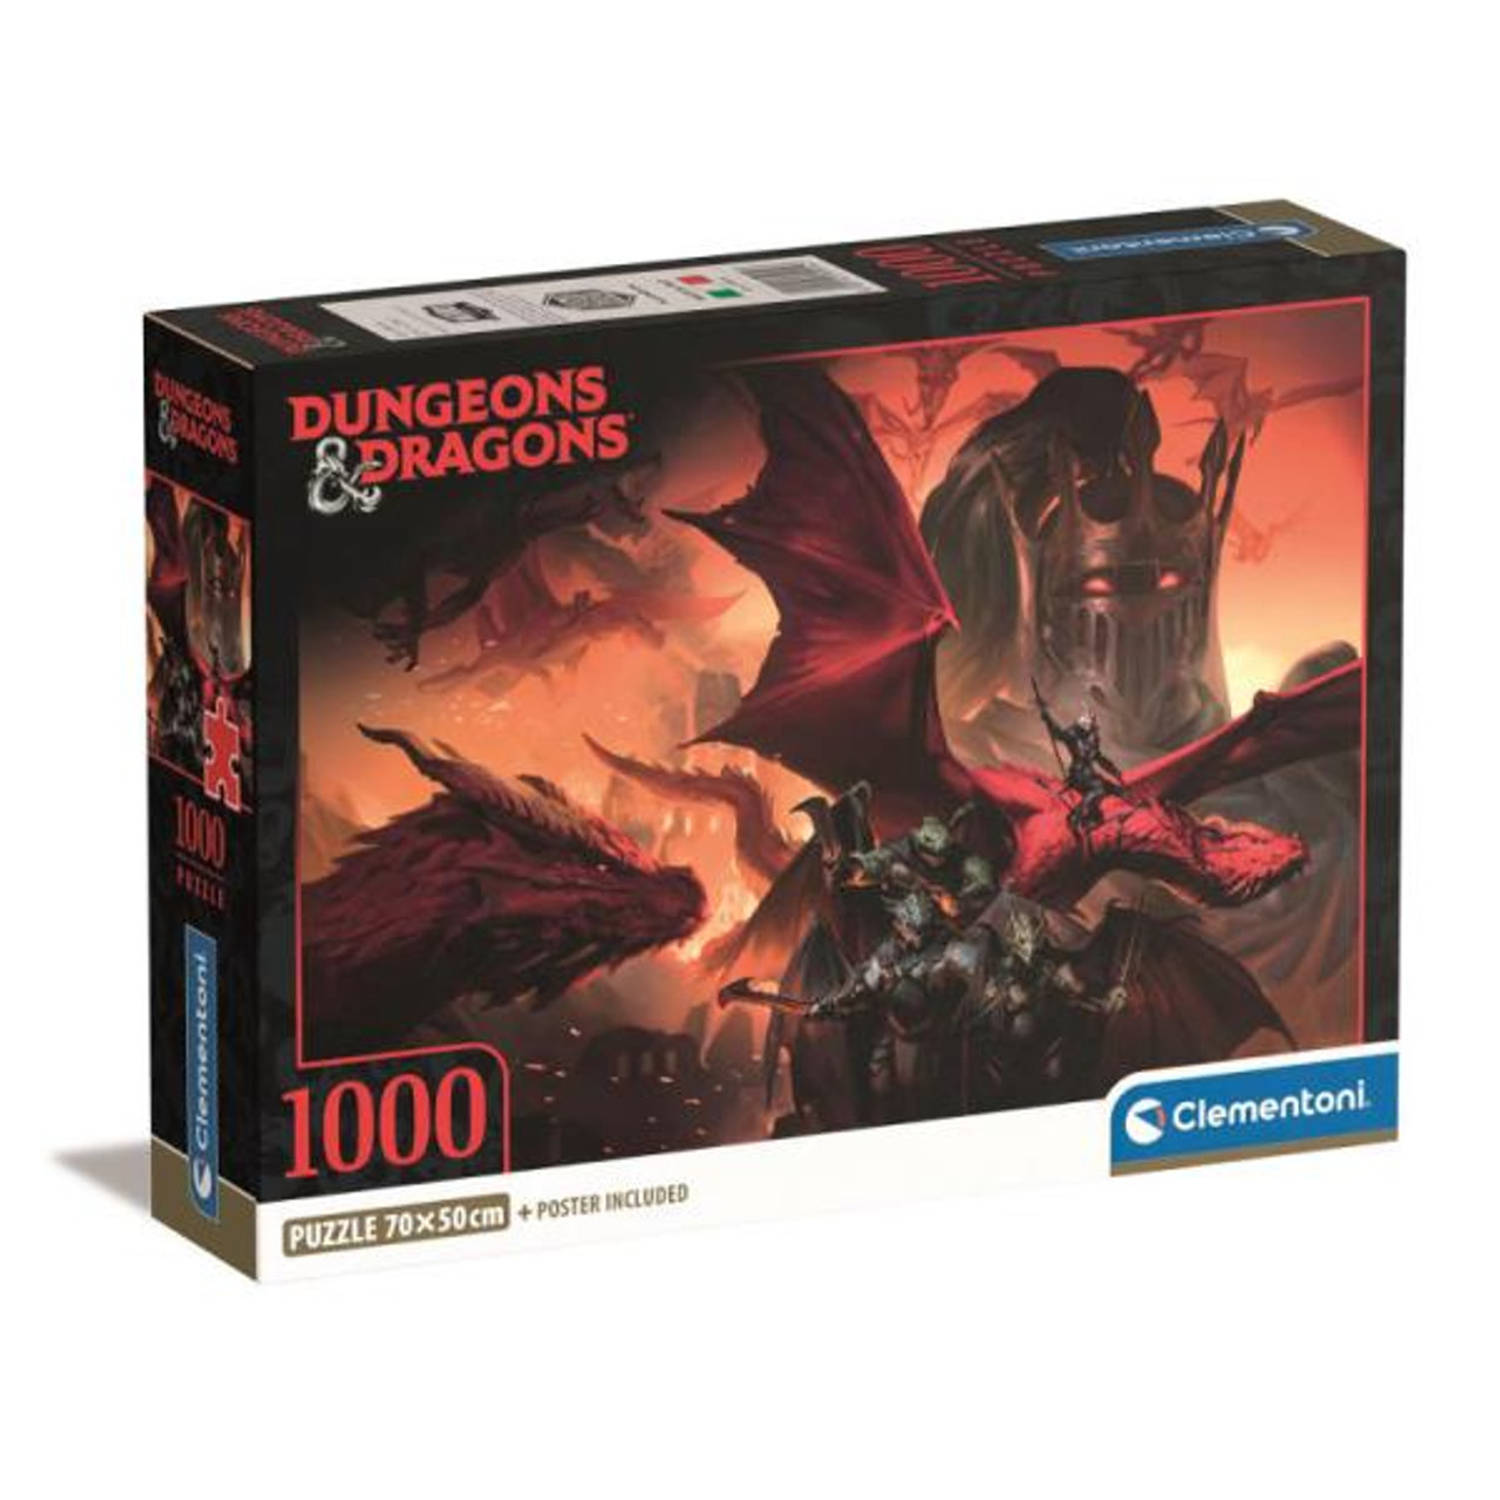 DUNGEONS & DRAGONS 1000 PC - PUZZLE 1